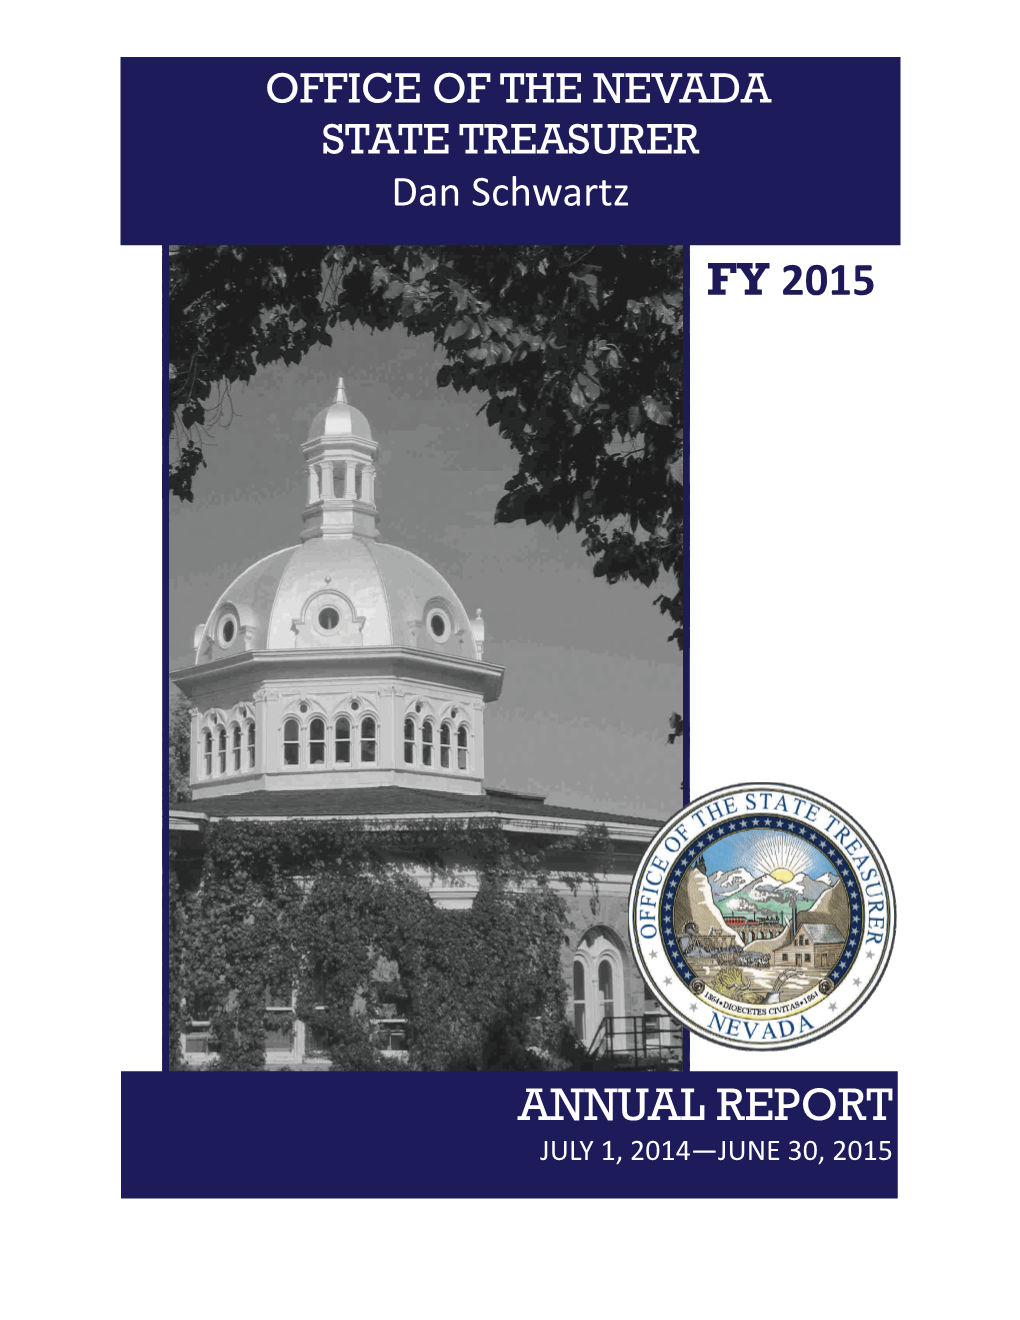 Annual Report Fy 2015